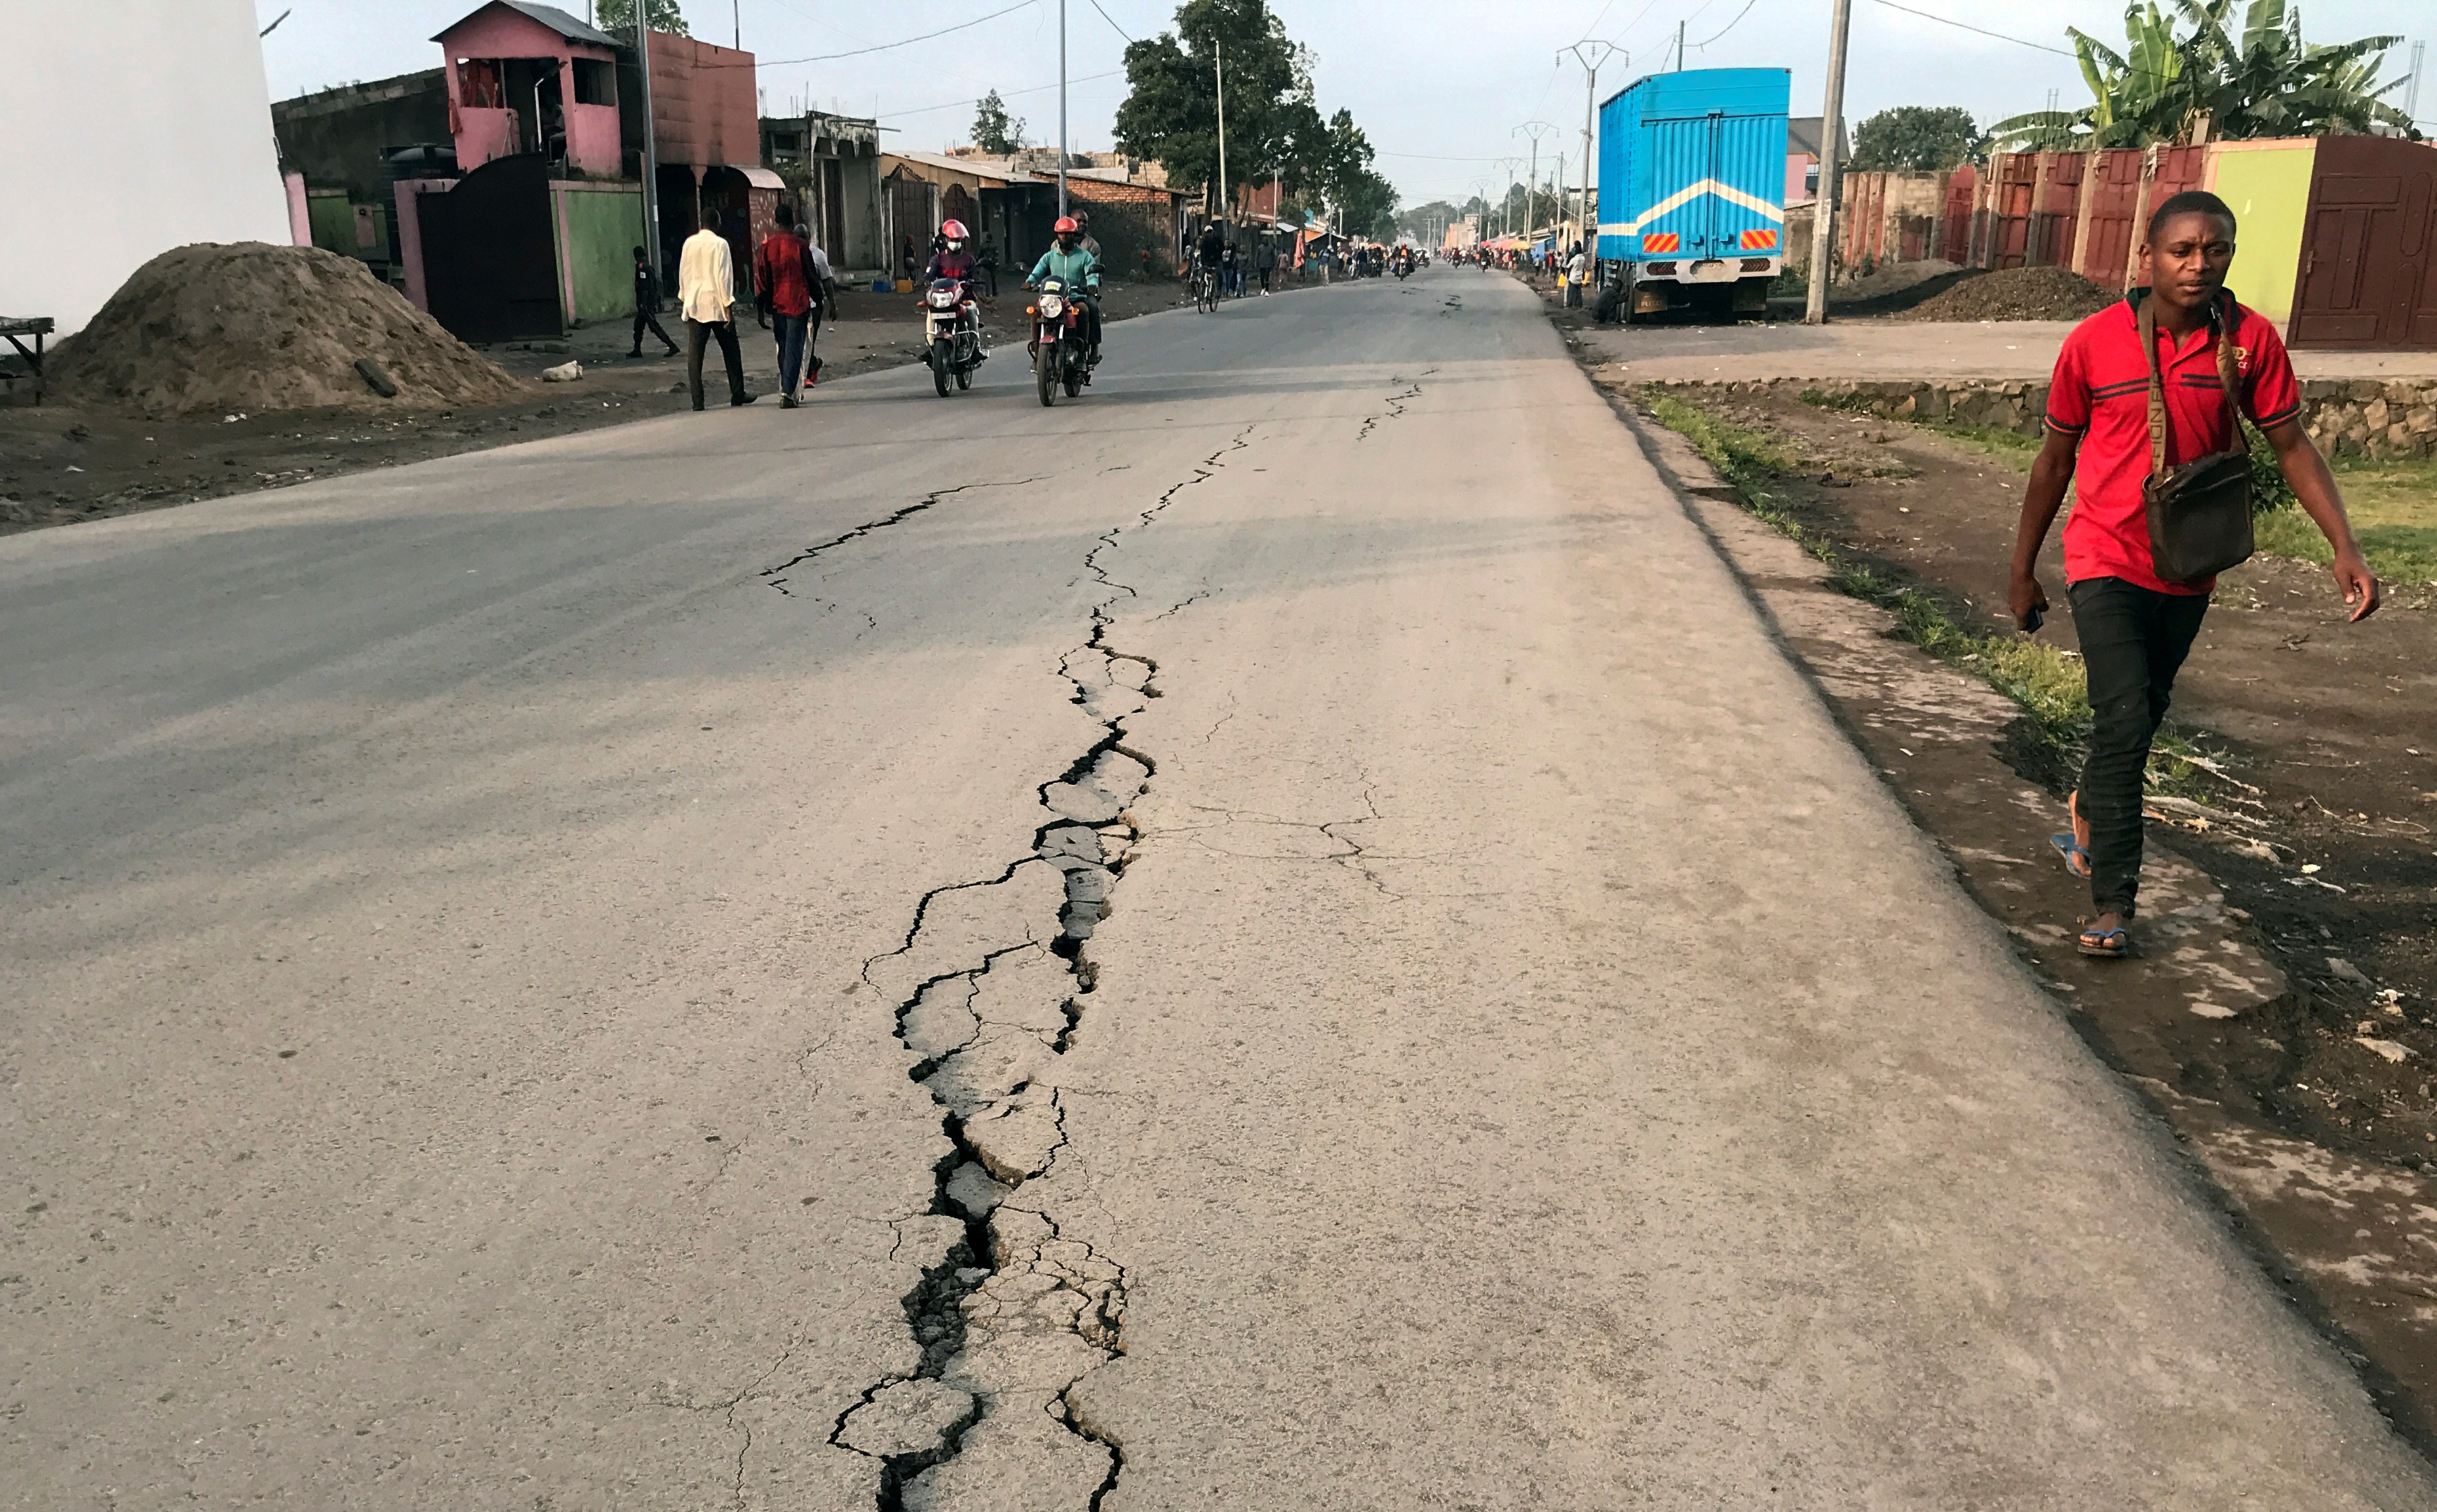 A pedestrian walks near a crack on the road caused by earth tremors as aftershocks following the eruption of Mount Nyiragongo volcano near Goma, in the Democratic Republic of Congo May 26, 2021. REUTERS/Djaffar Al Katanty